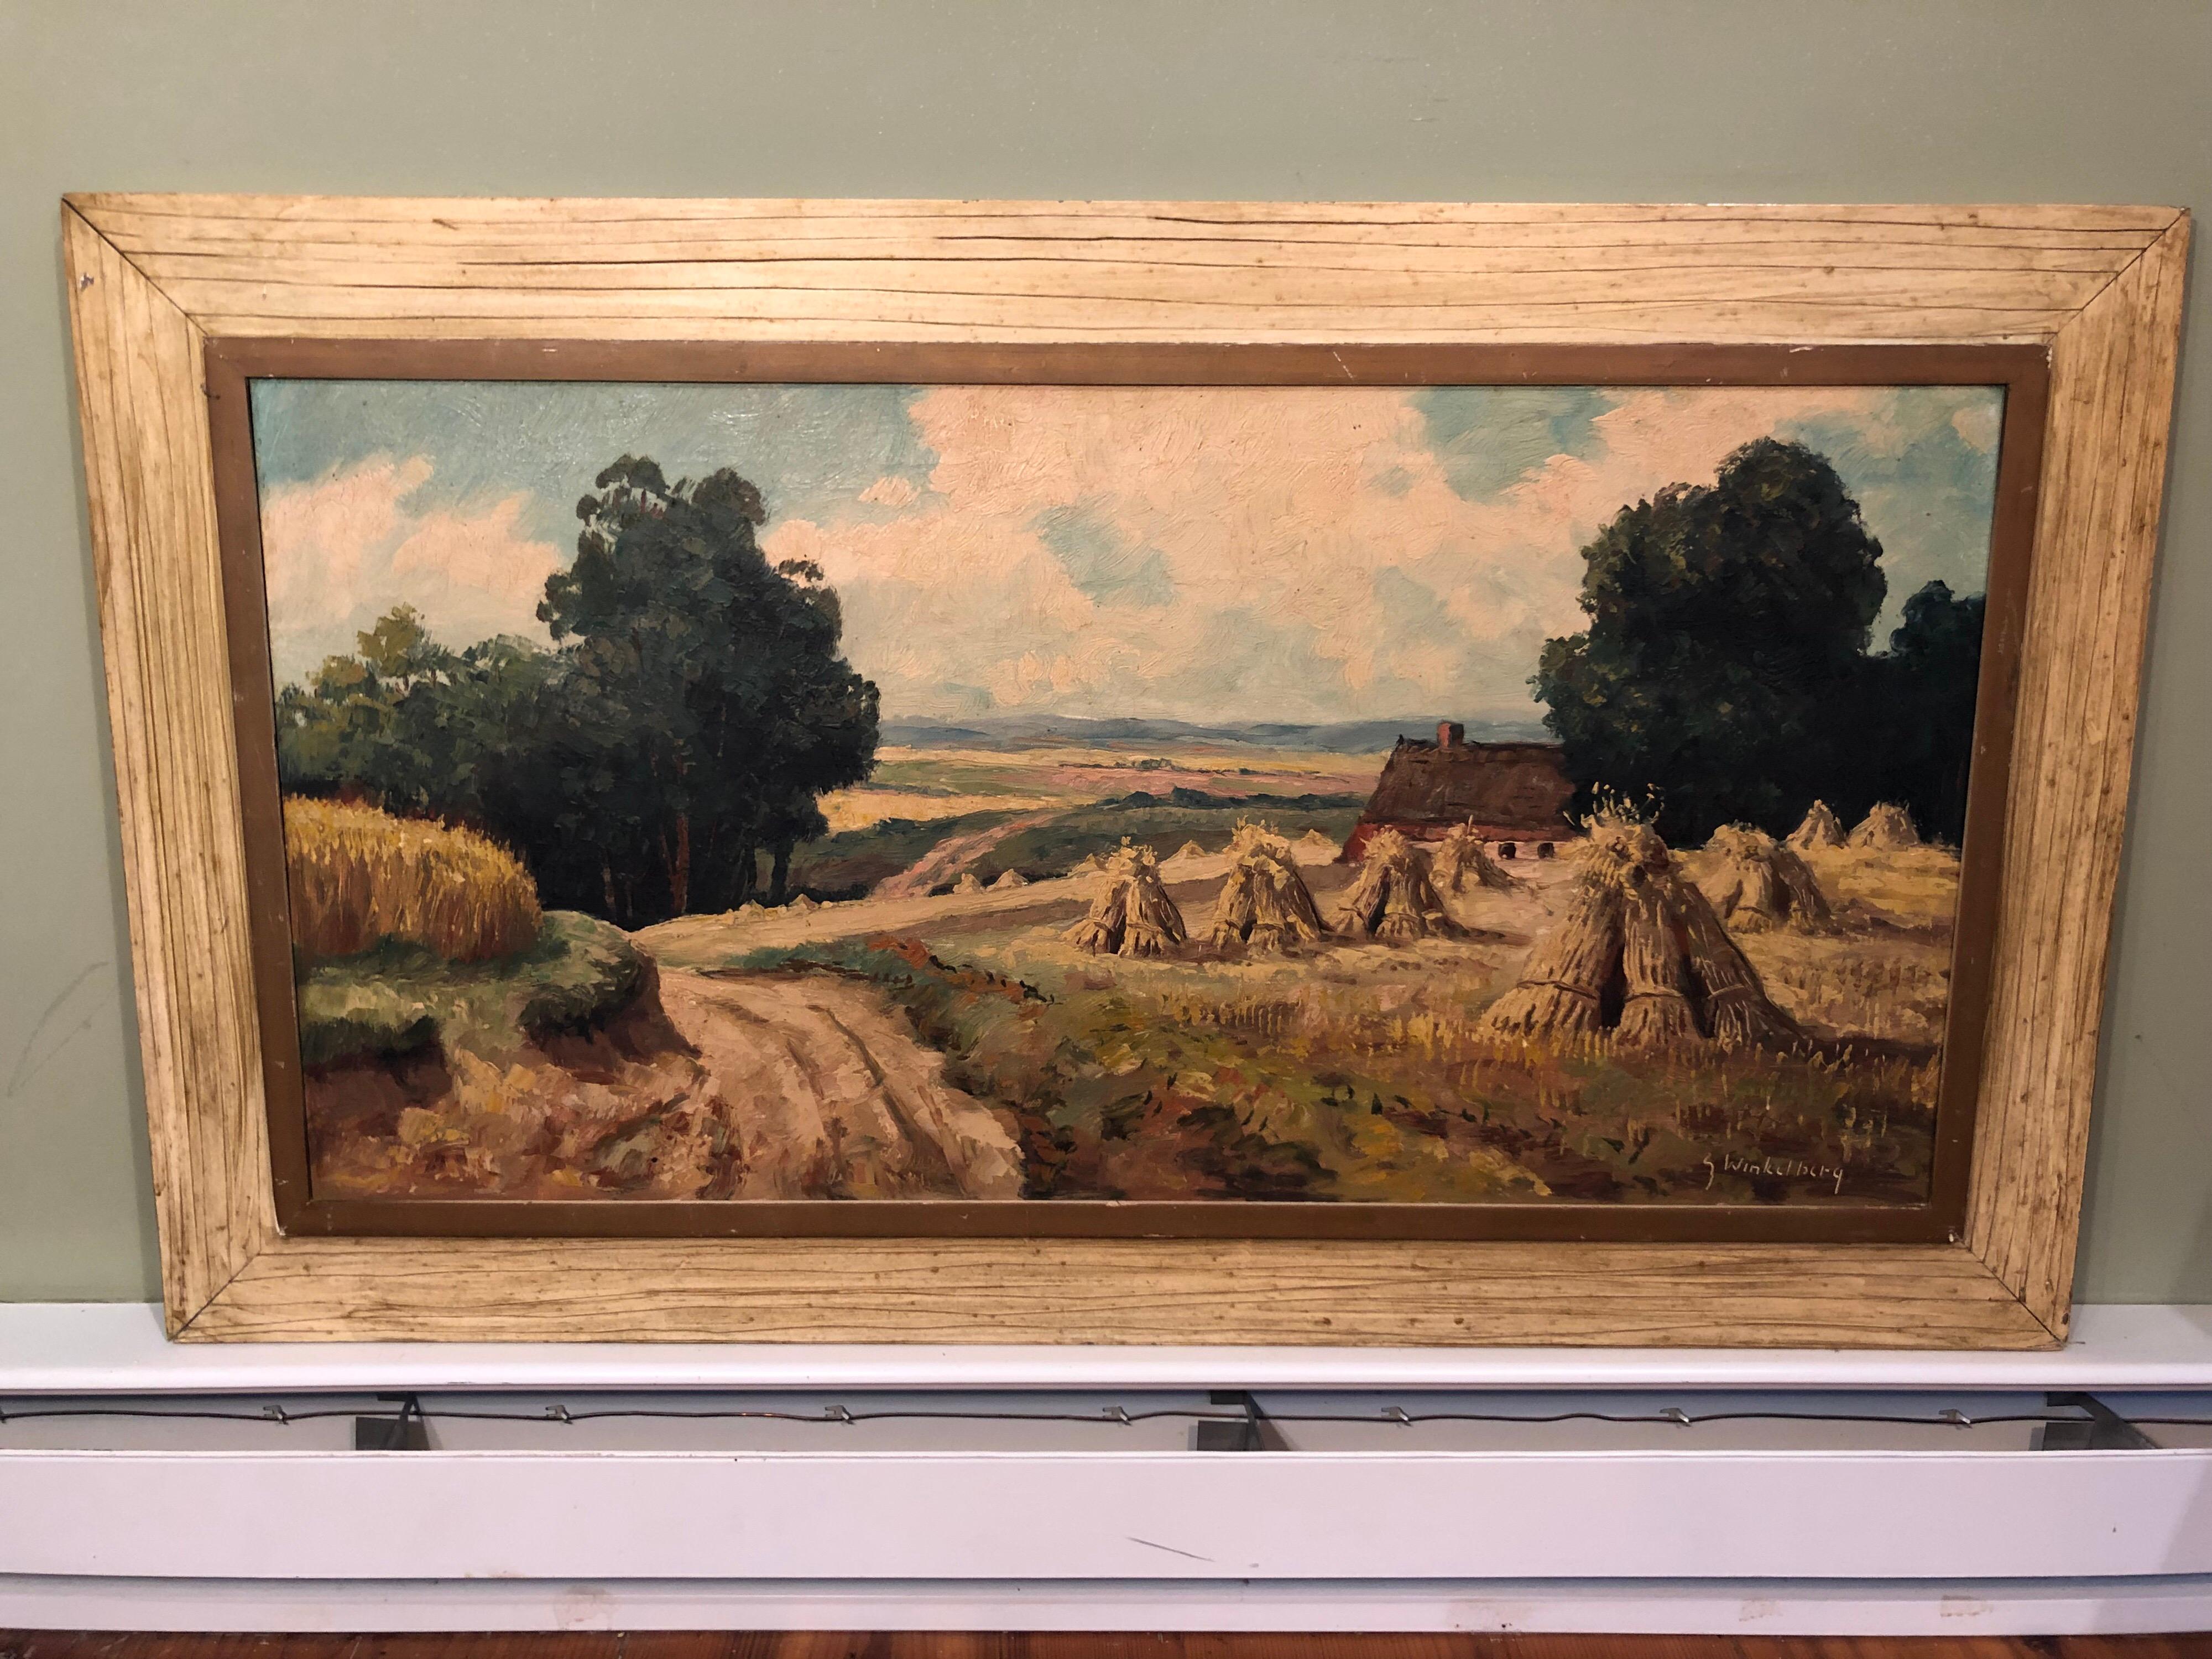 Signed Pastoral Landscape on Canvas signed G. Winkelberg. Bucolic farm landscape with bails of hay and a barn. Nice rustic country frame. Muted earth tones to this plein air piece.